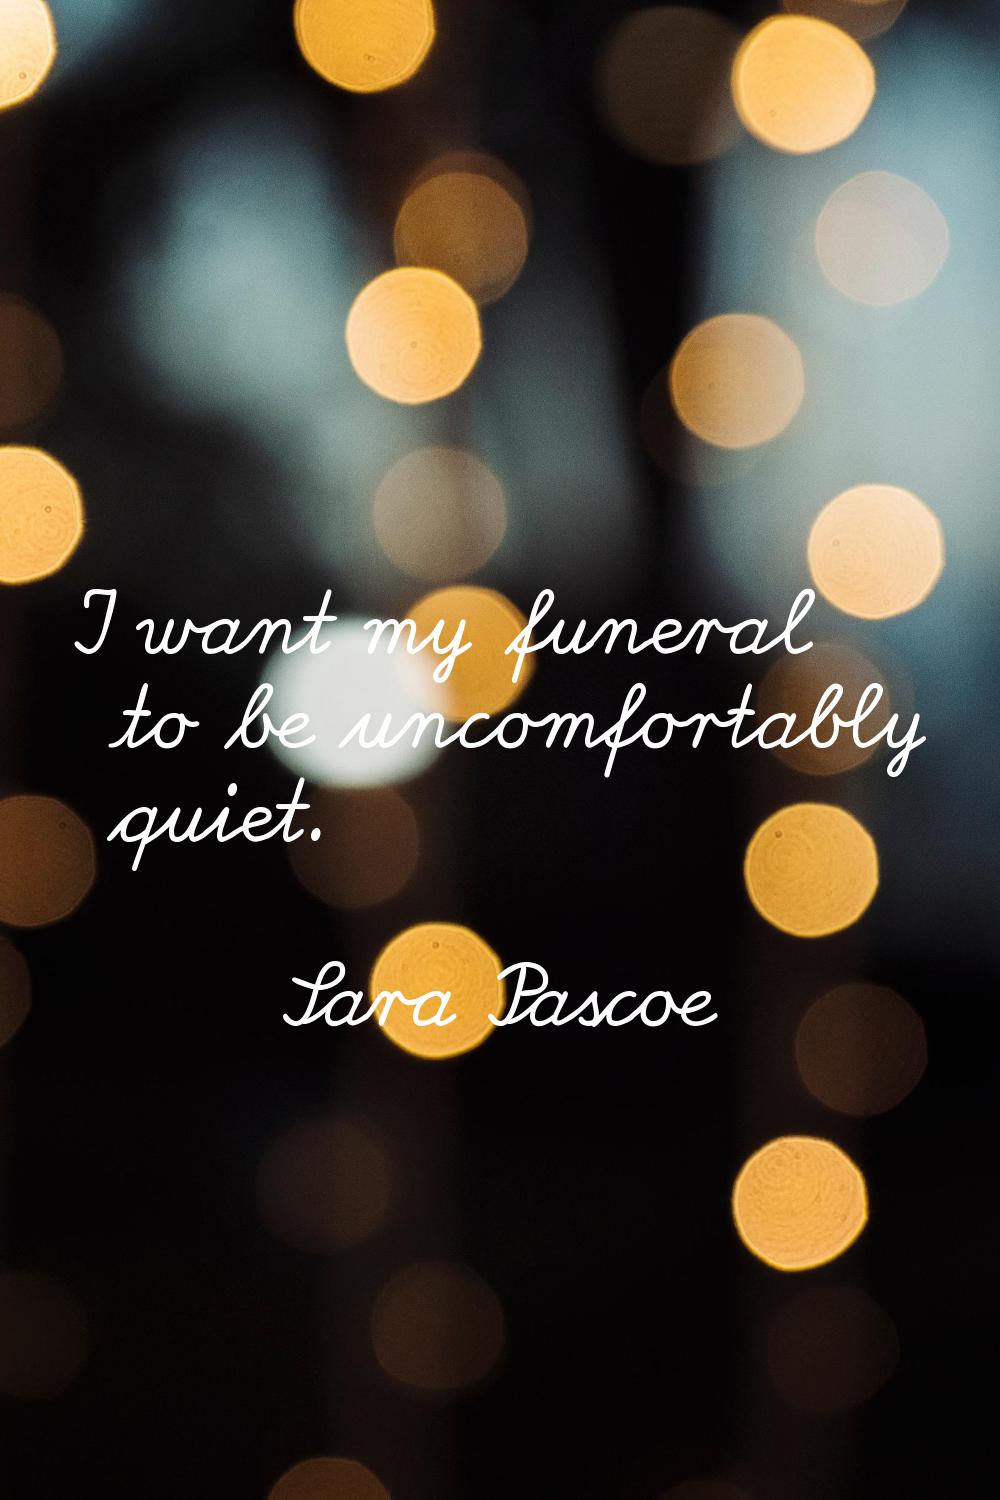 I want my funeral to be uncomfortably quiet.